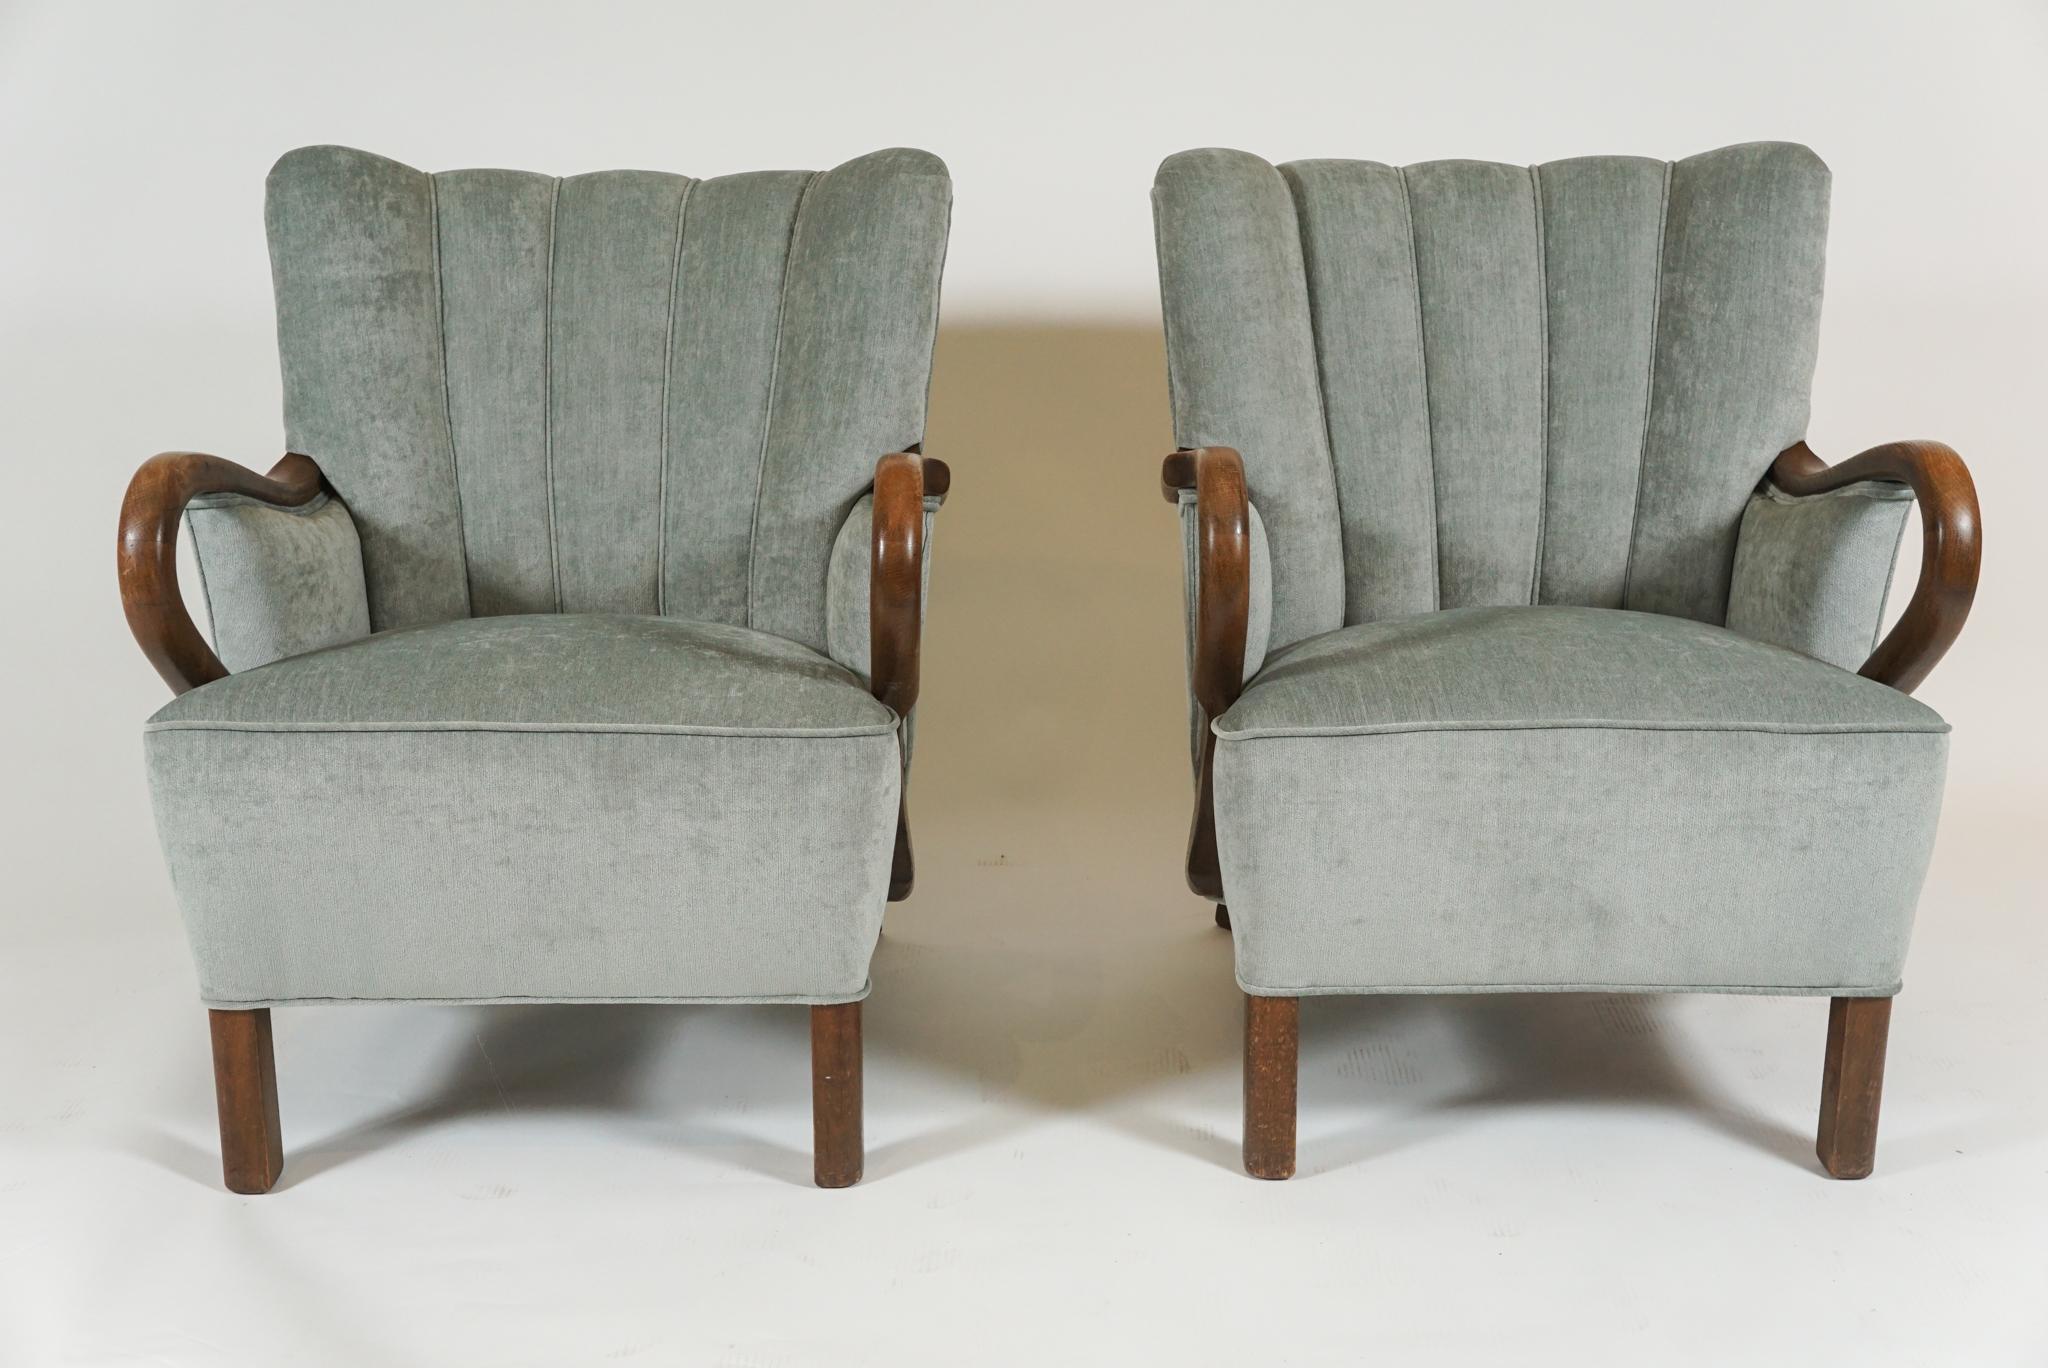 Pair of Danish modern, channel-back armchairs with exaggerated open arms, in oak, newly upholstered in pale grey-blue velveteen, solidly built from 1940s, very comfortable and stylish would fit in lounge, living room, library or den.